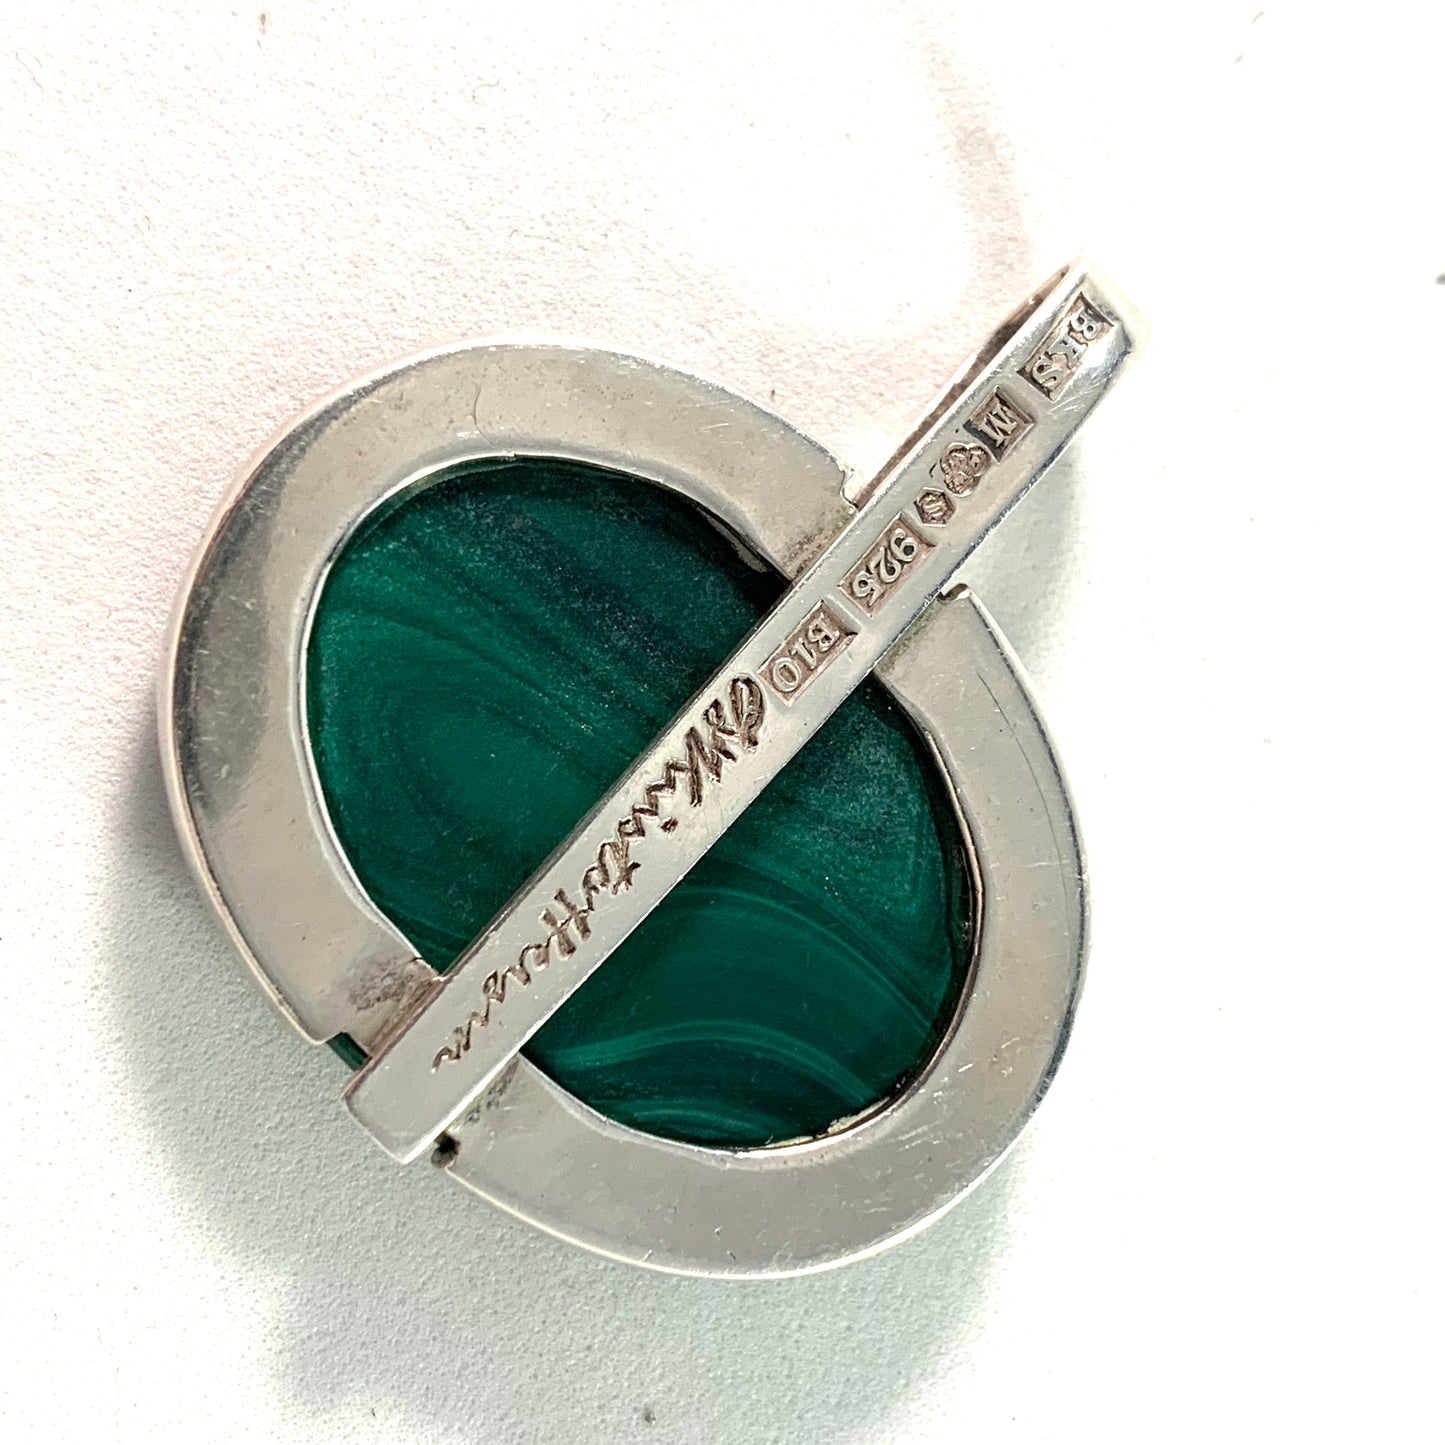 Bror Kristoffersson, Sweden 1976 (first year) Signed Sterling Malachite Pendant.